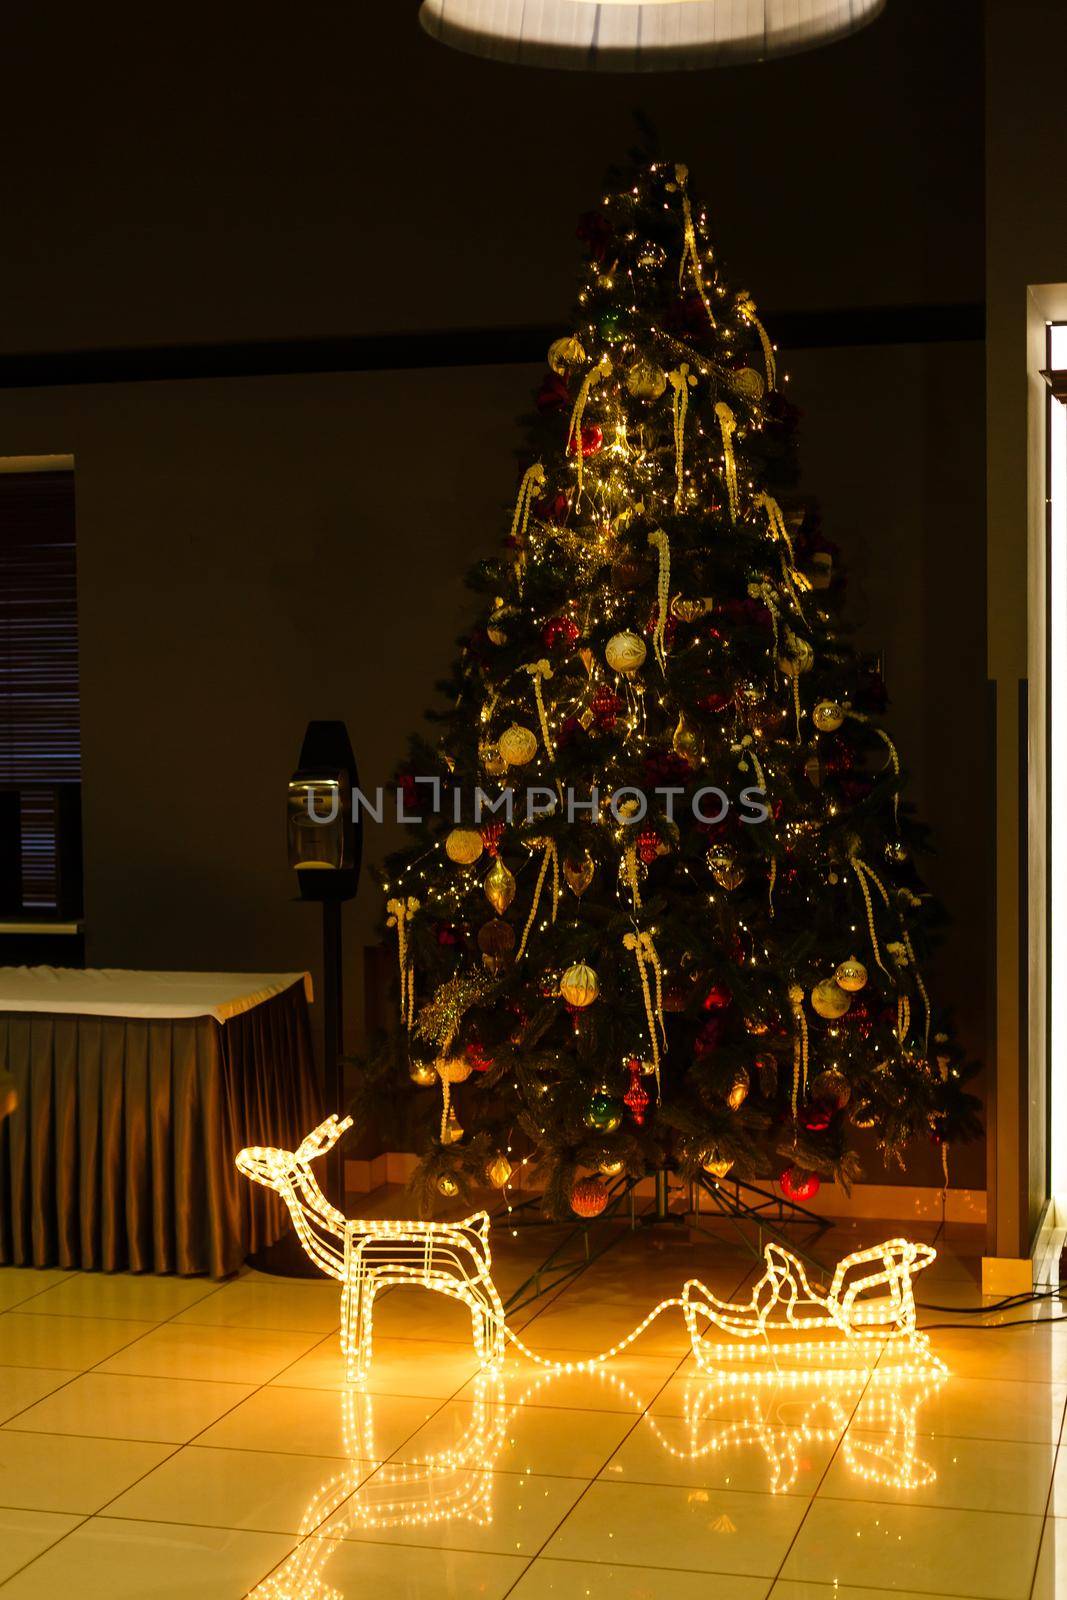 A christmas tree in a room by Andelov13